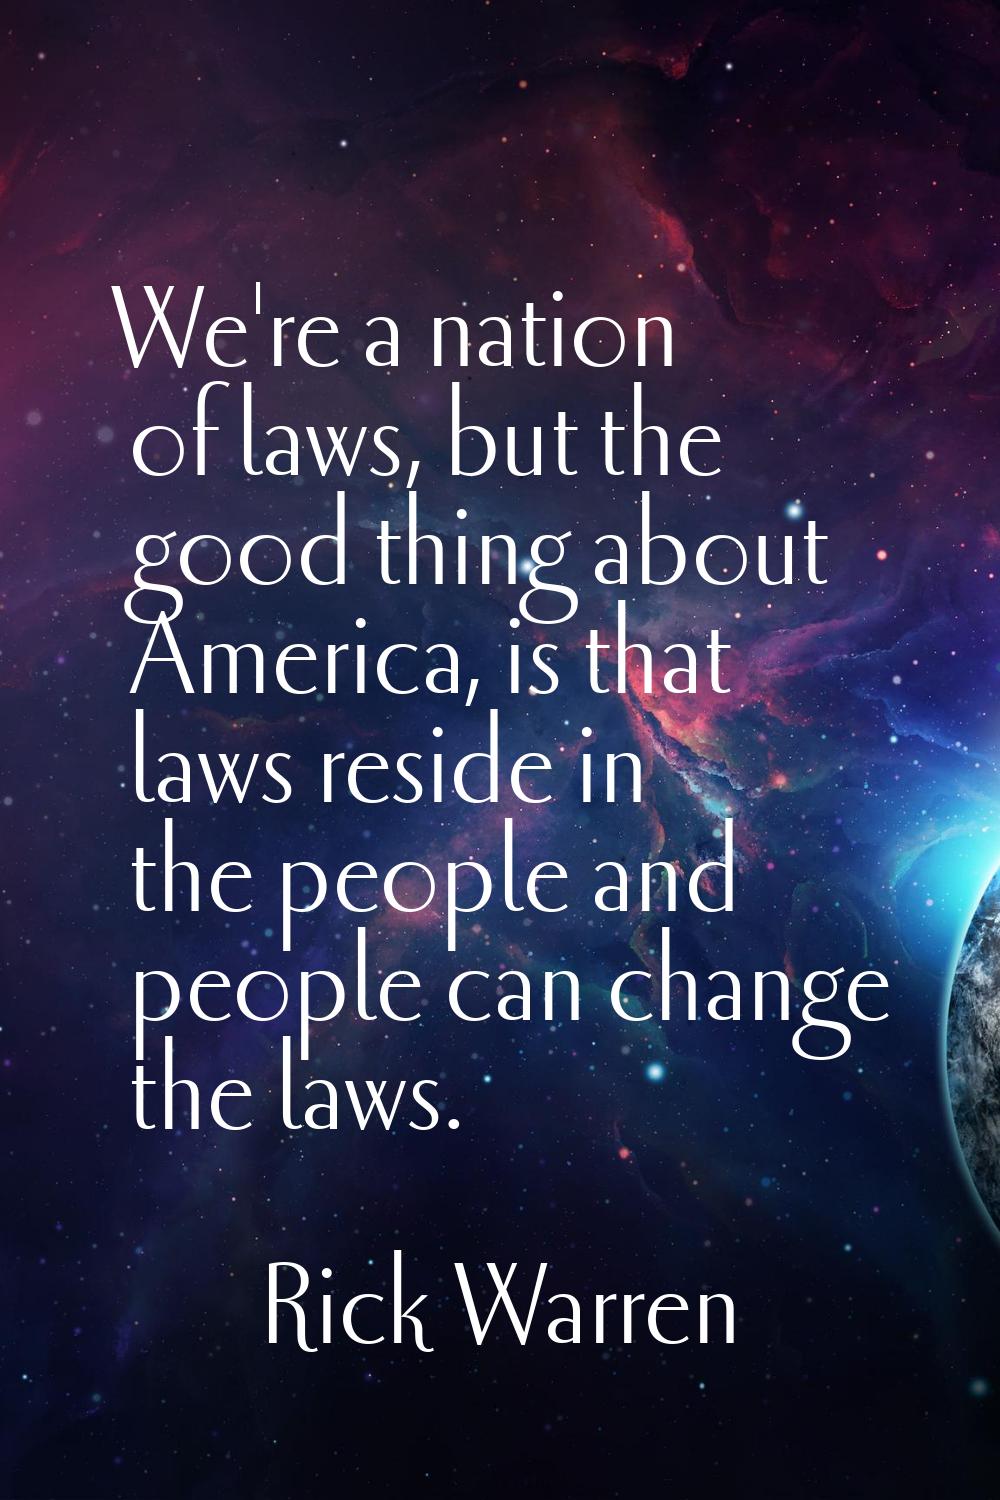 We're a nation of laws, but the good thing about America, is that laws reside in the people and peo